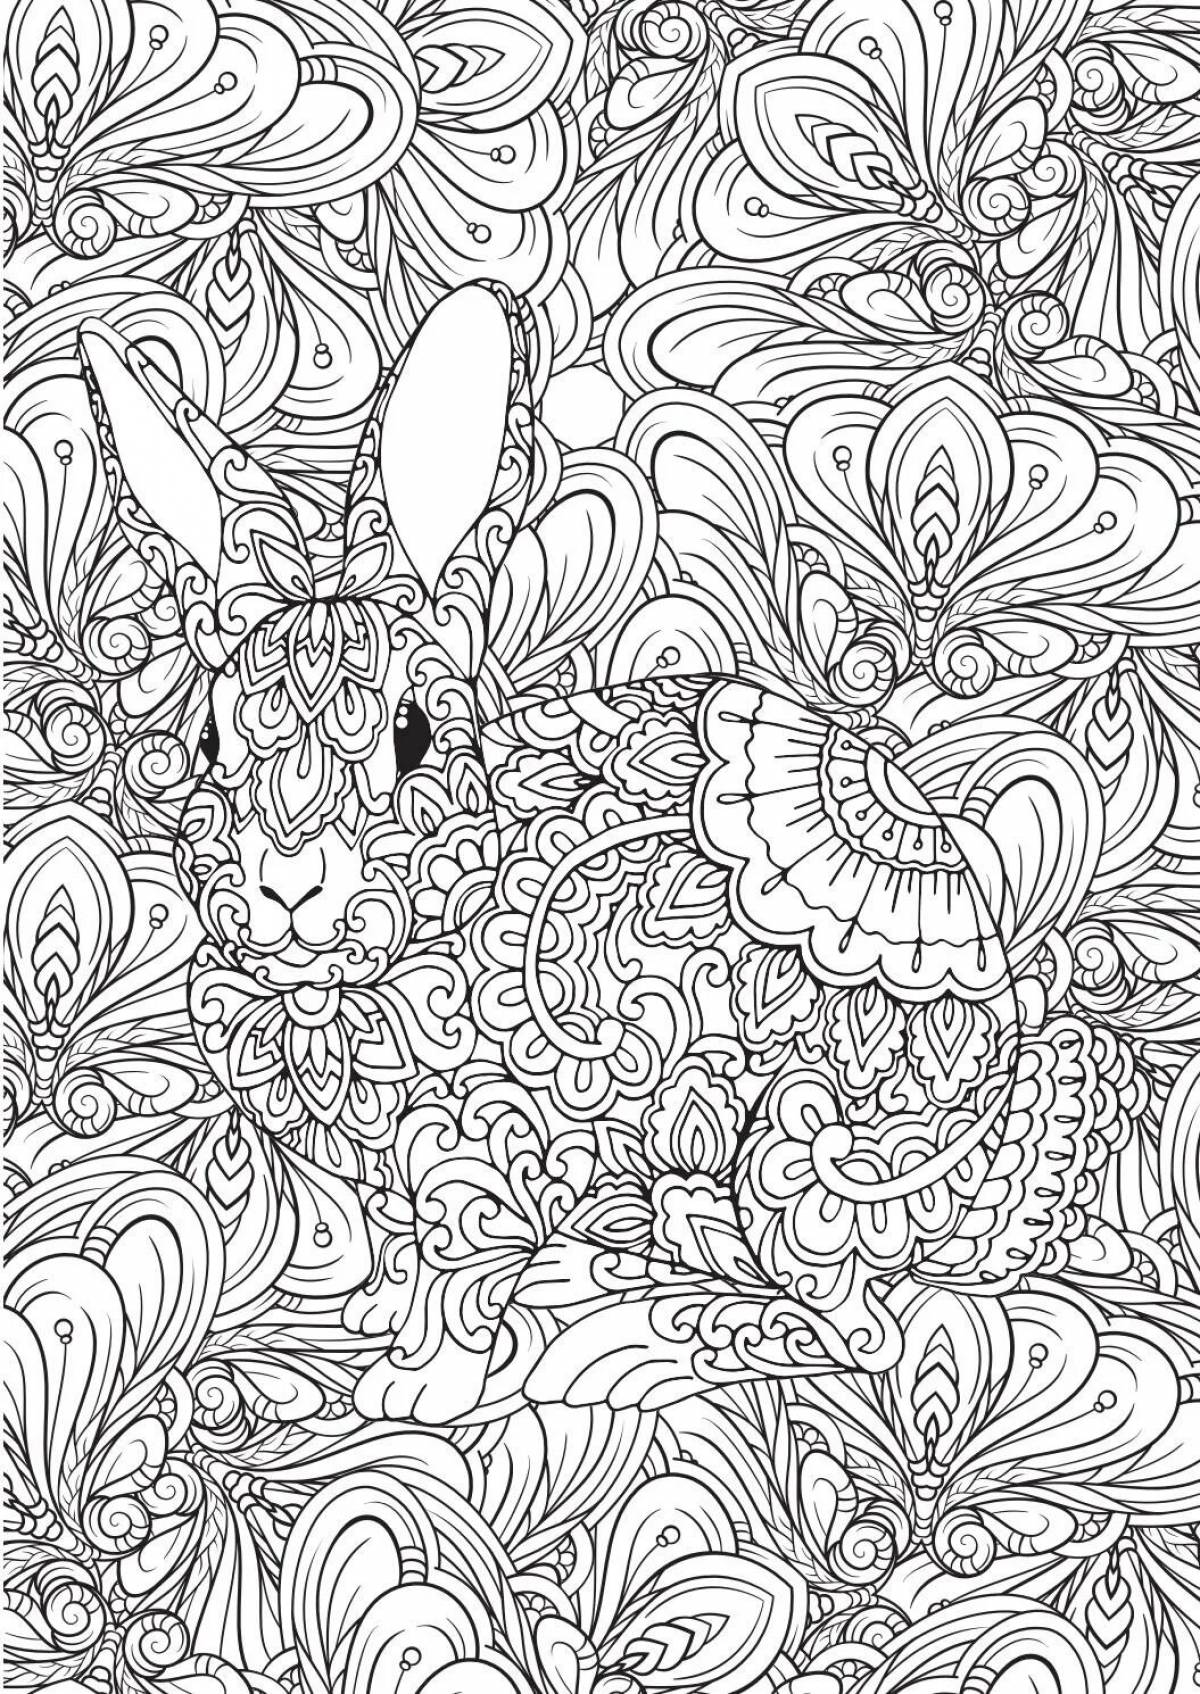 Dazzling coloring book beautiful for all adults